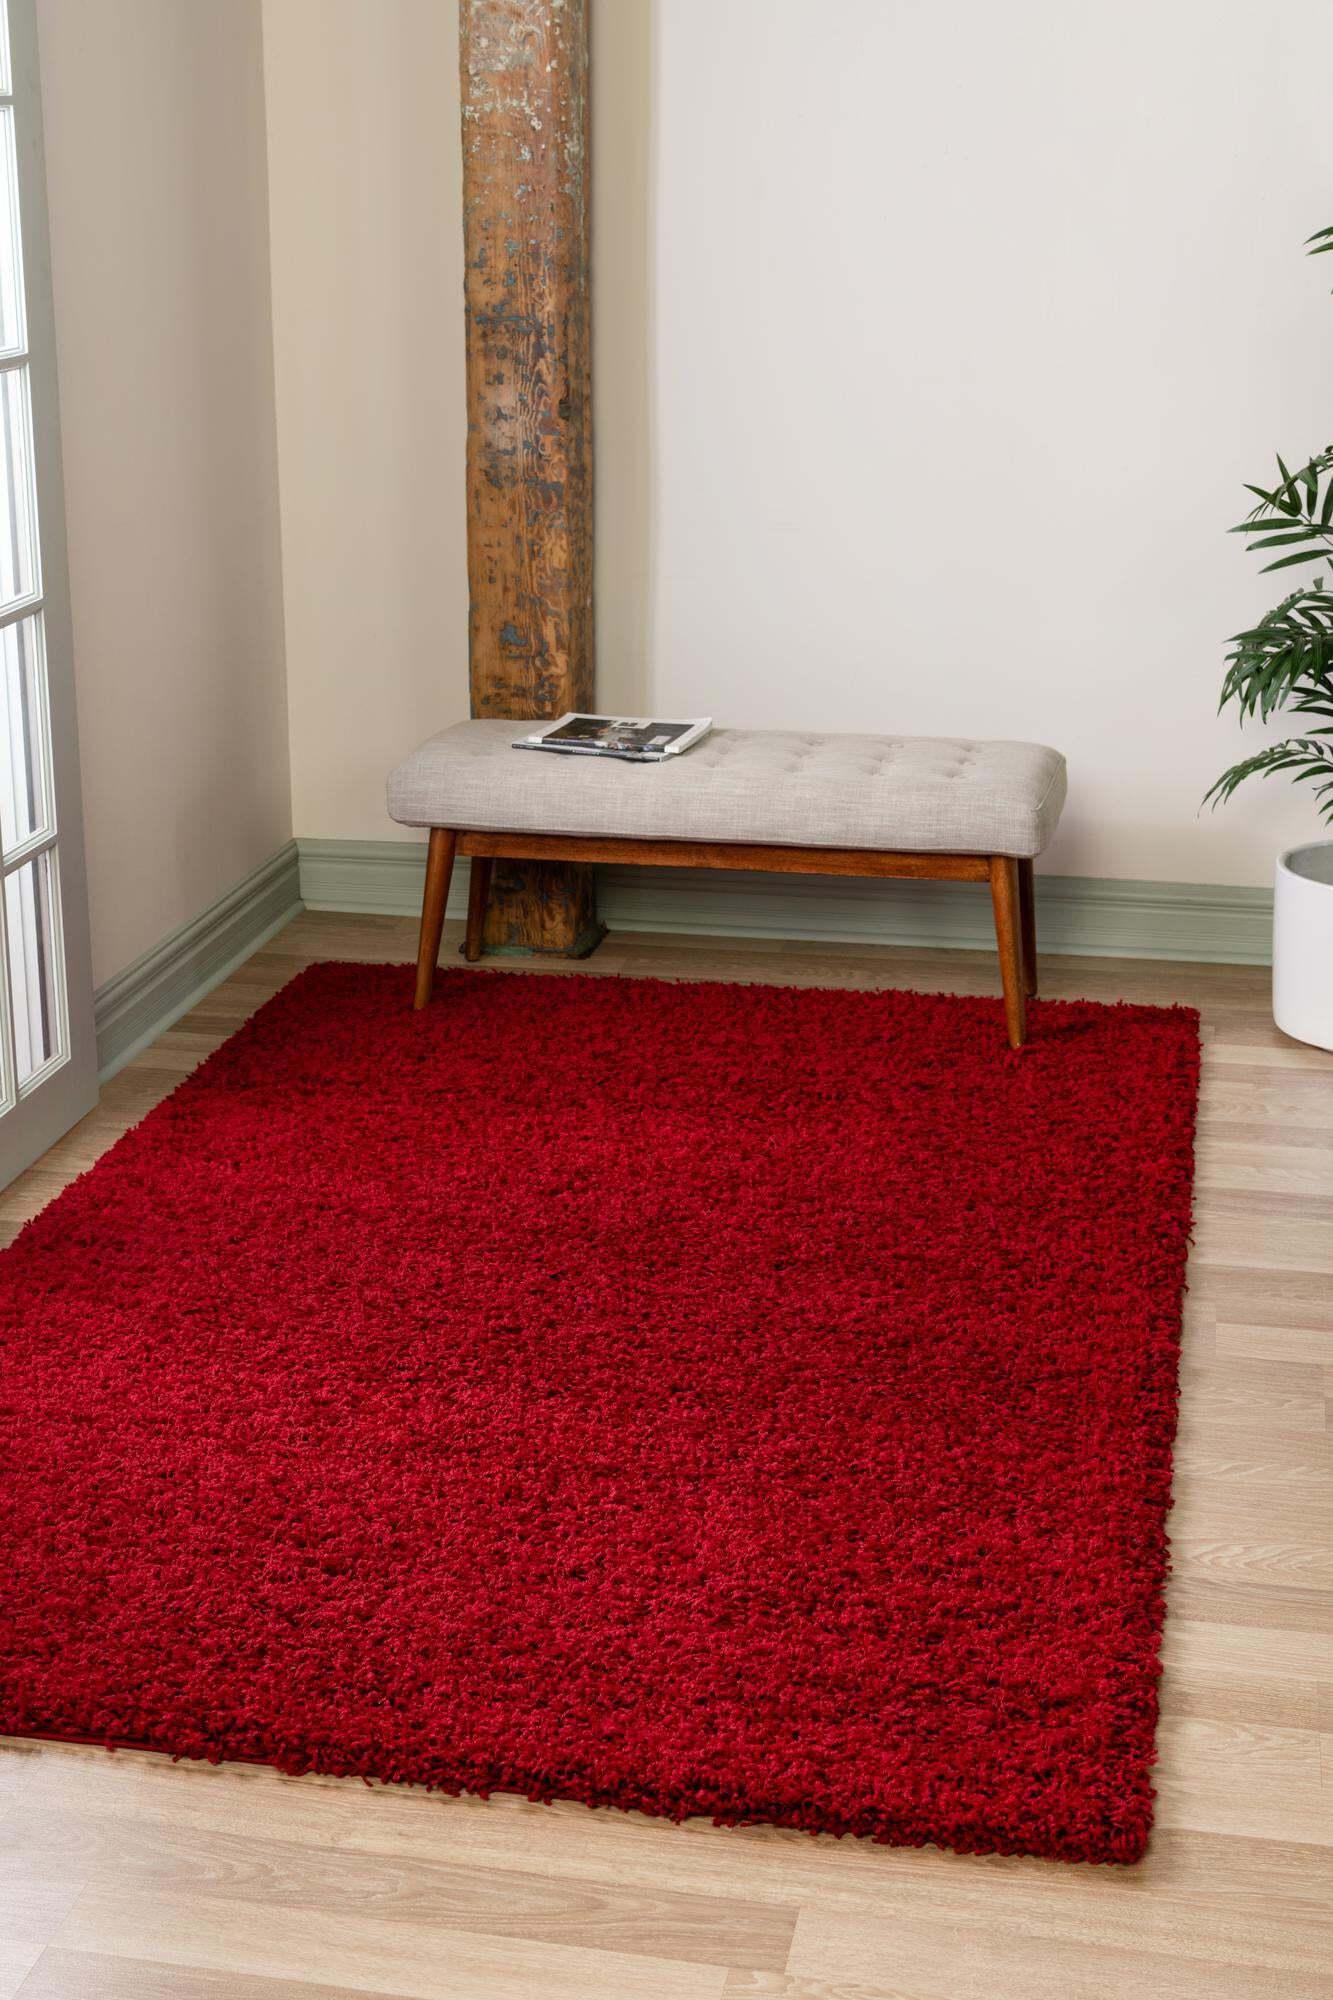 Unique Loom Indoor Rugs - Solid Shag Solid Rectangular 8x10 Rug Cherry Red